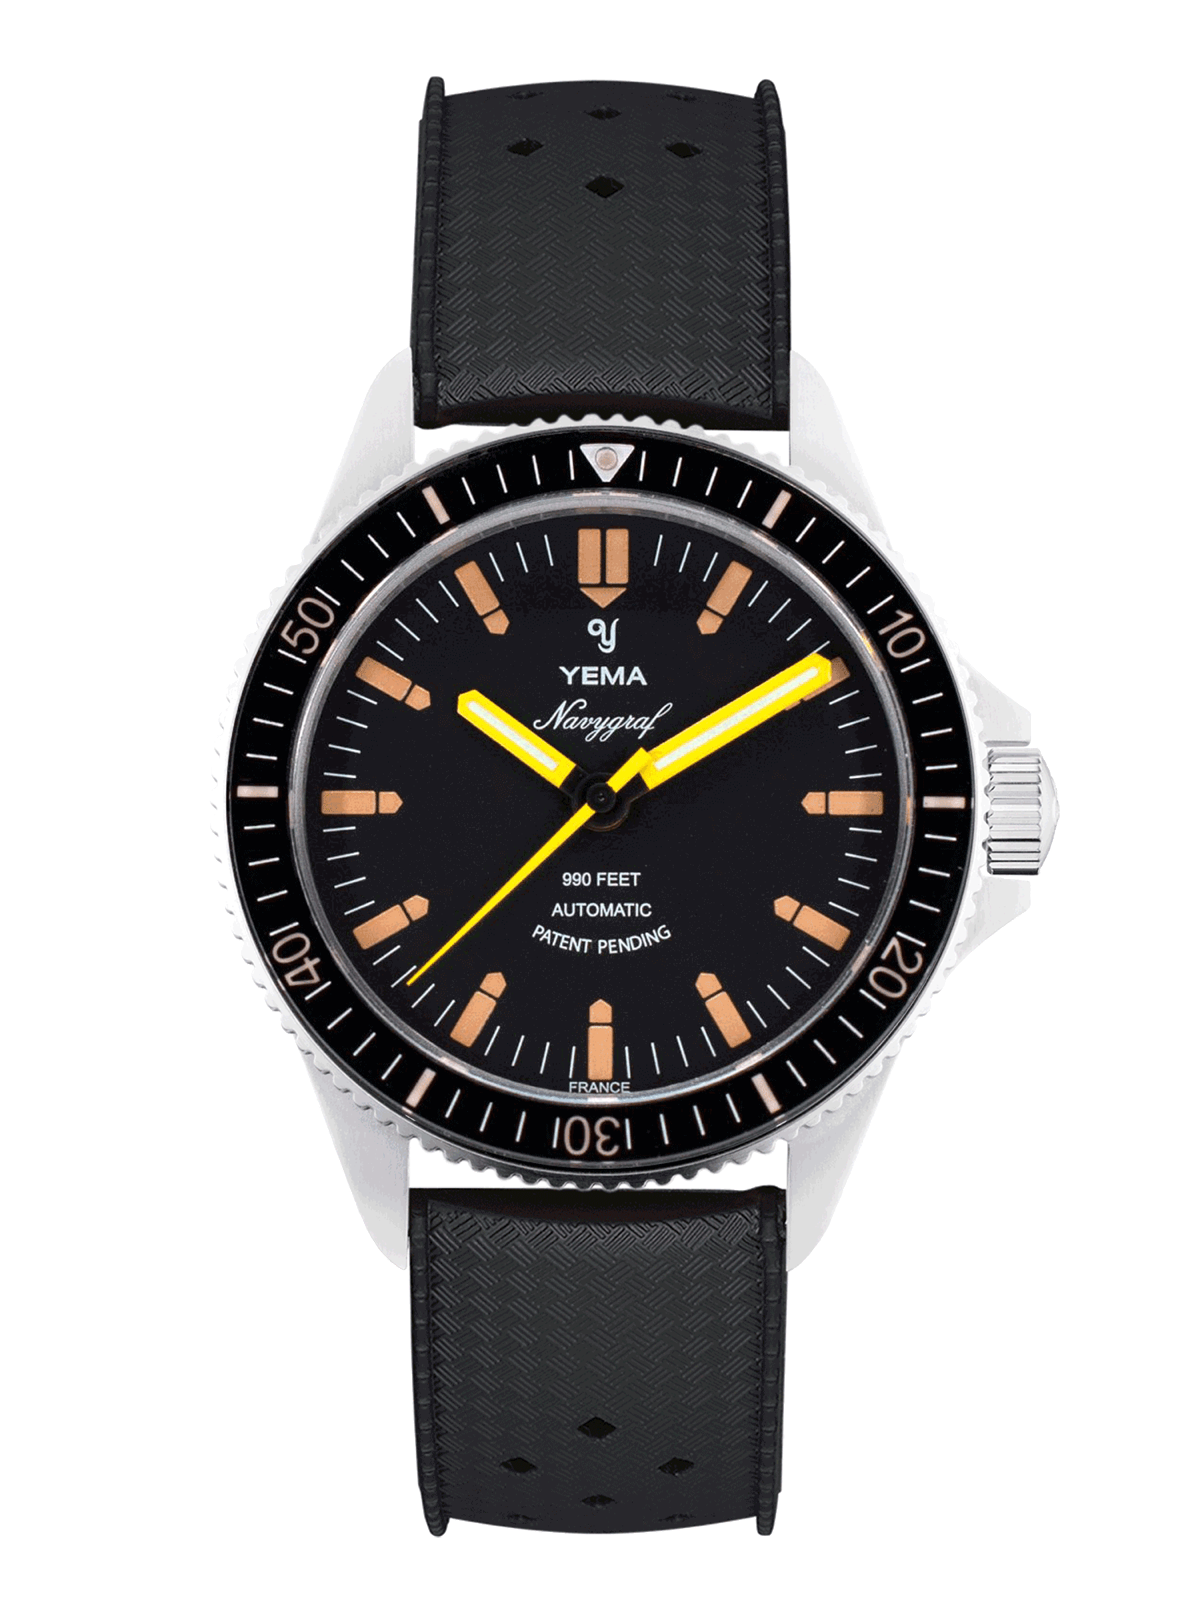 MINT YEMA NAVYGRAF Heritage Steel Diver Automatic In house